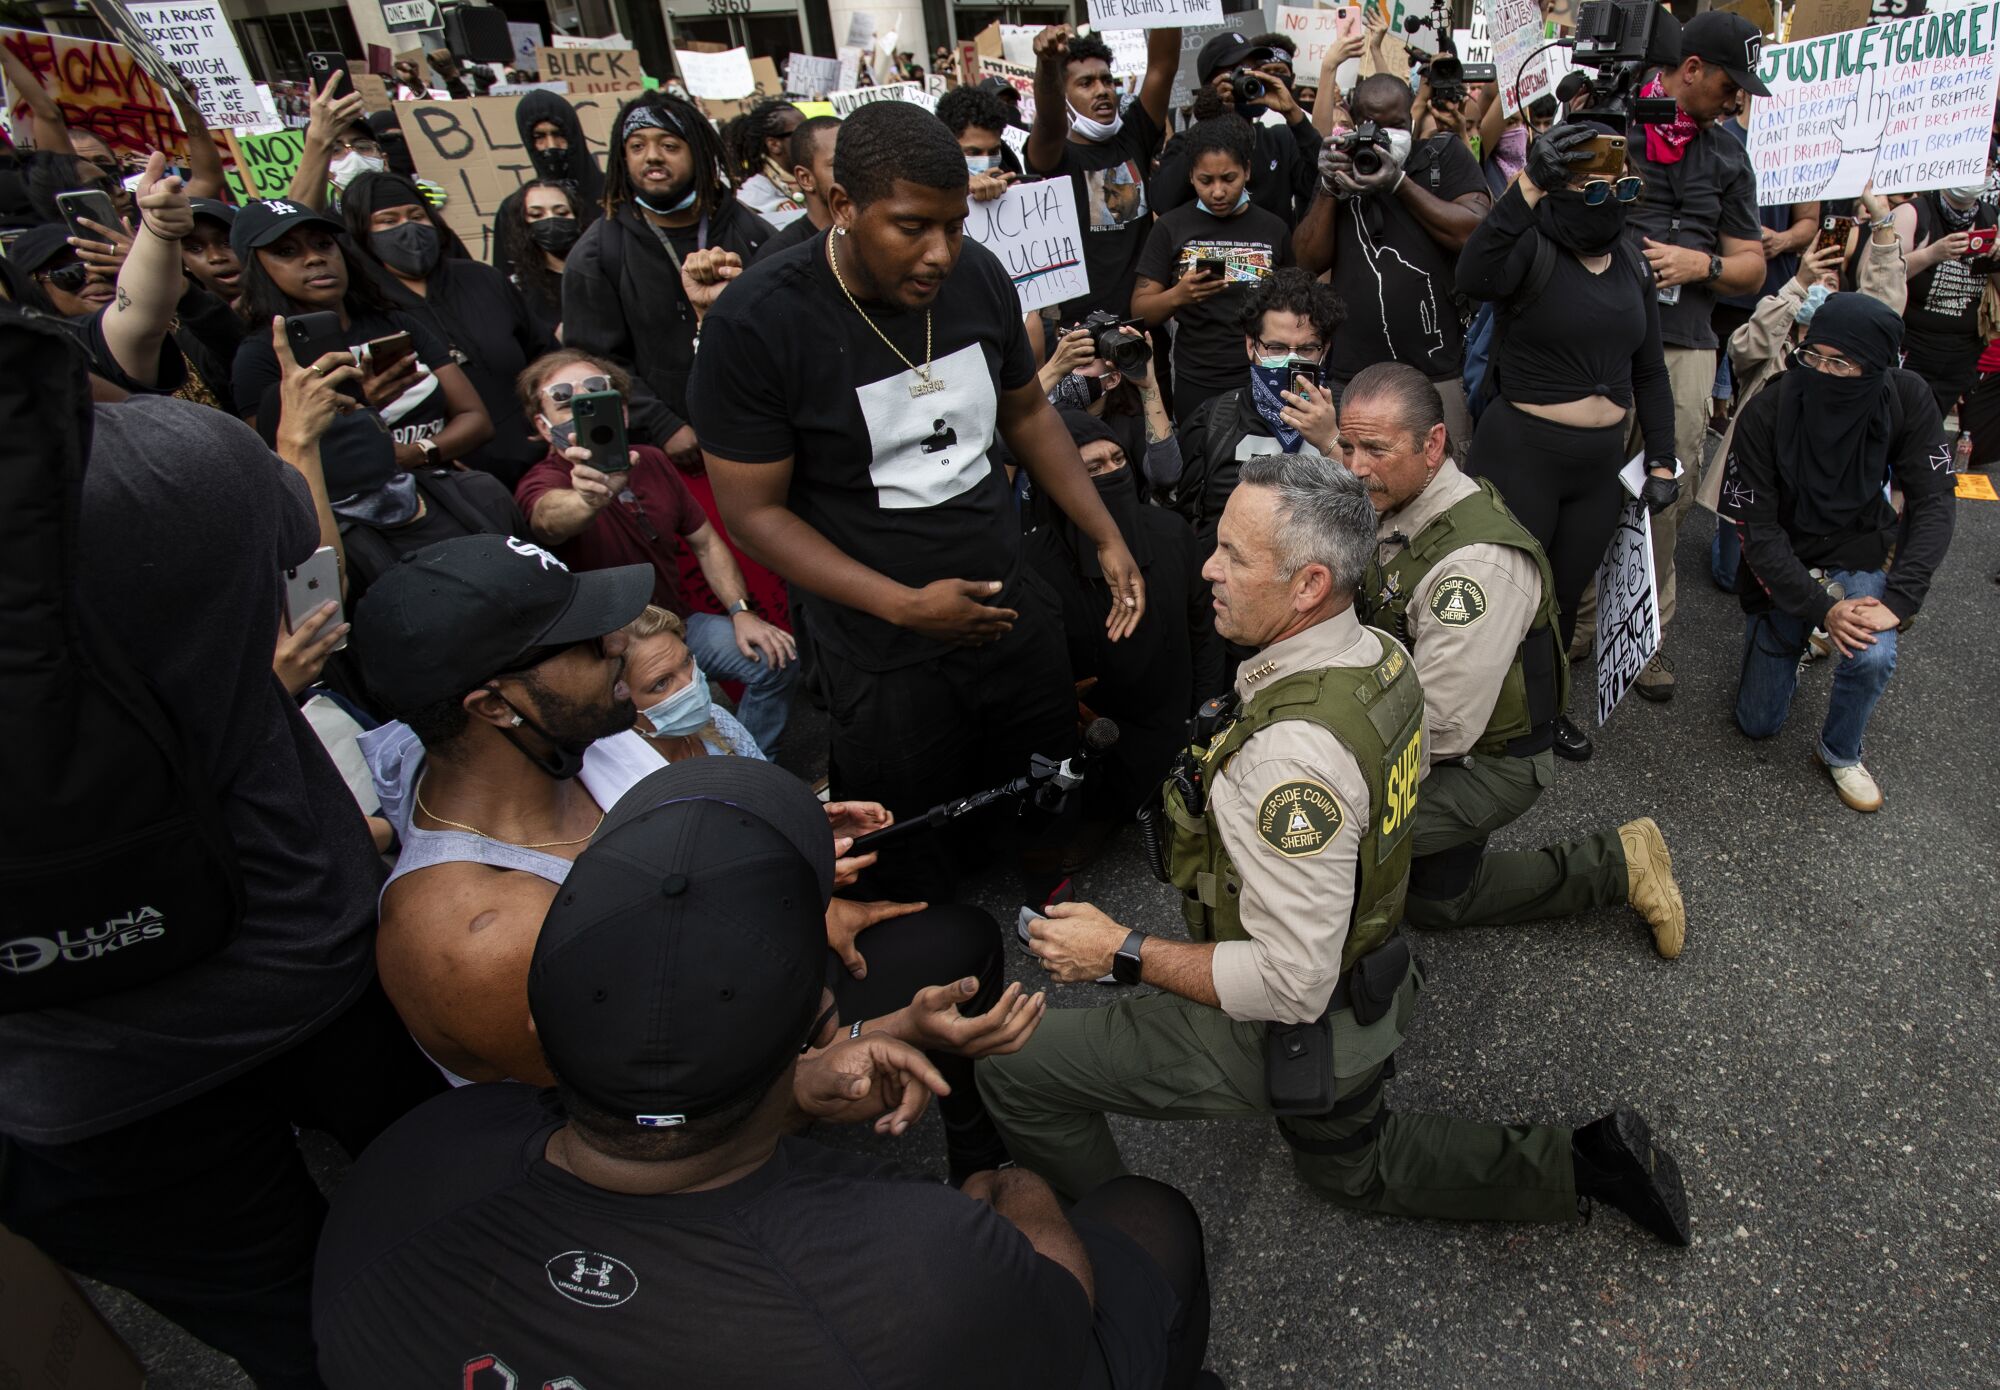 Riverside County Sheriff Chad Bianco takes a knee with demonstrators after thousands of protesters marched.